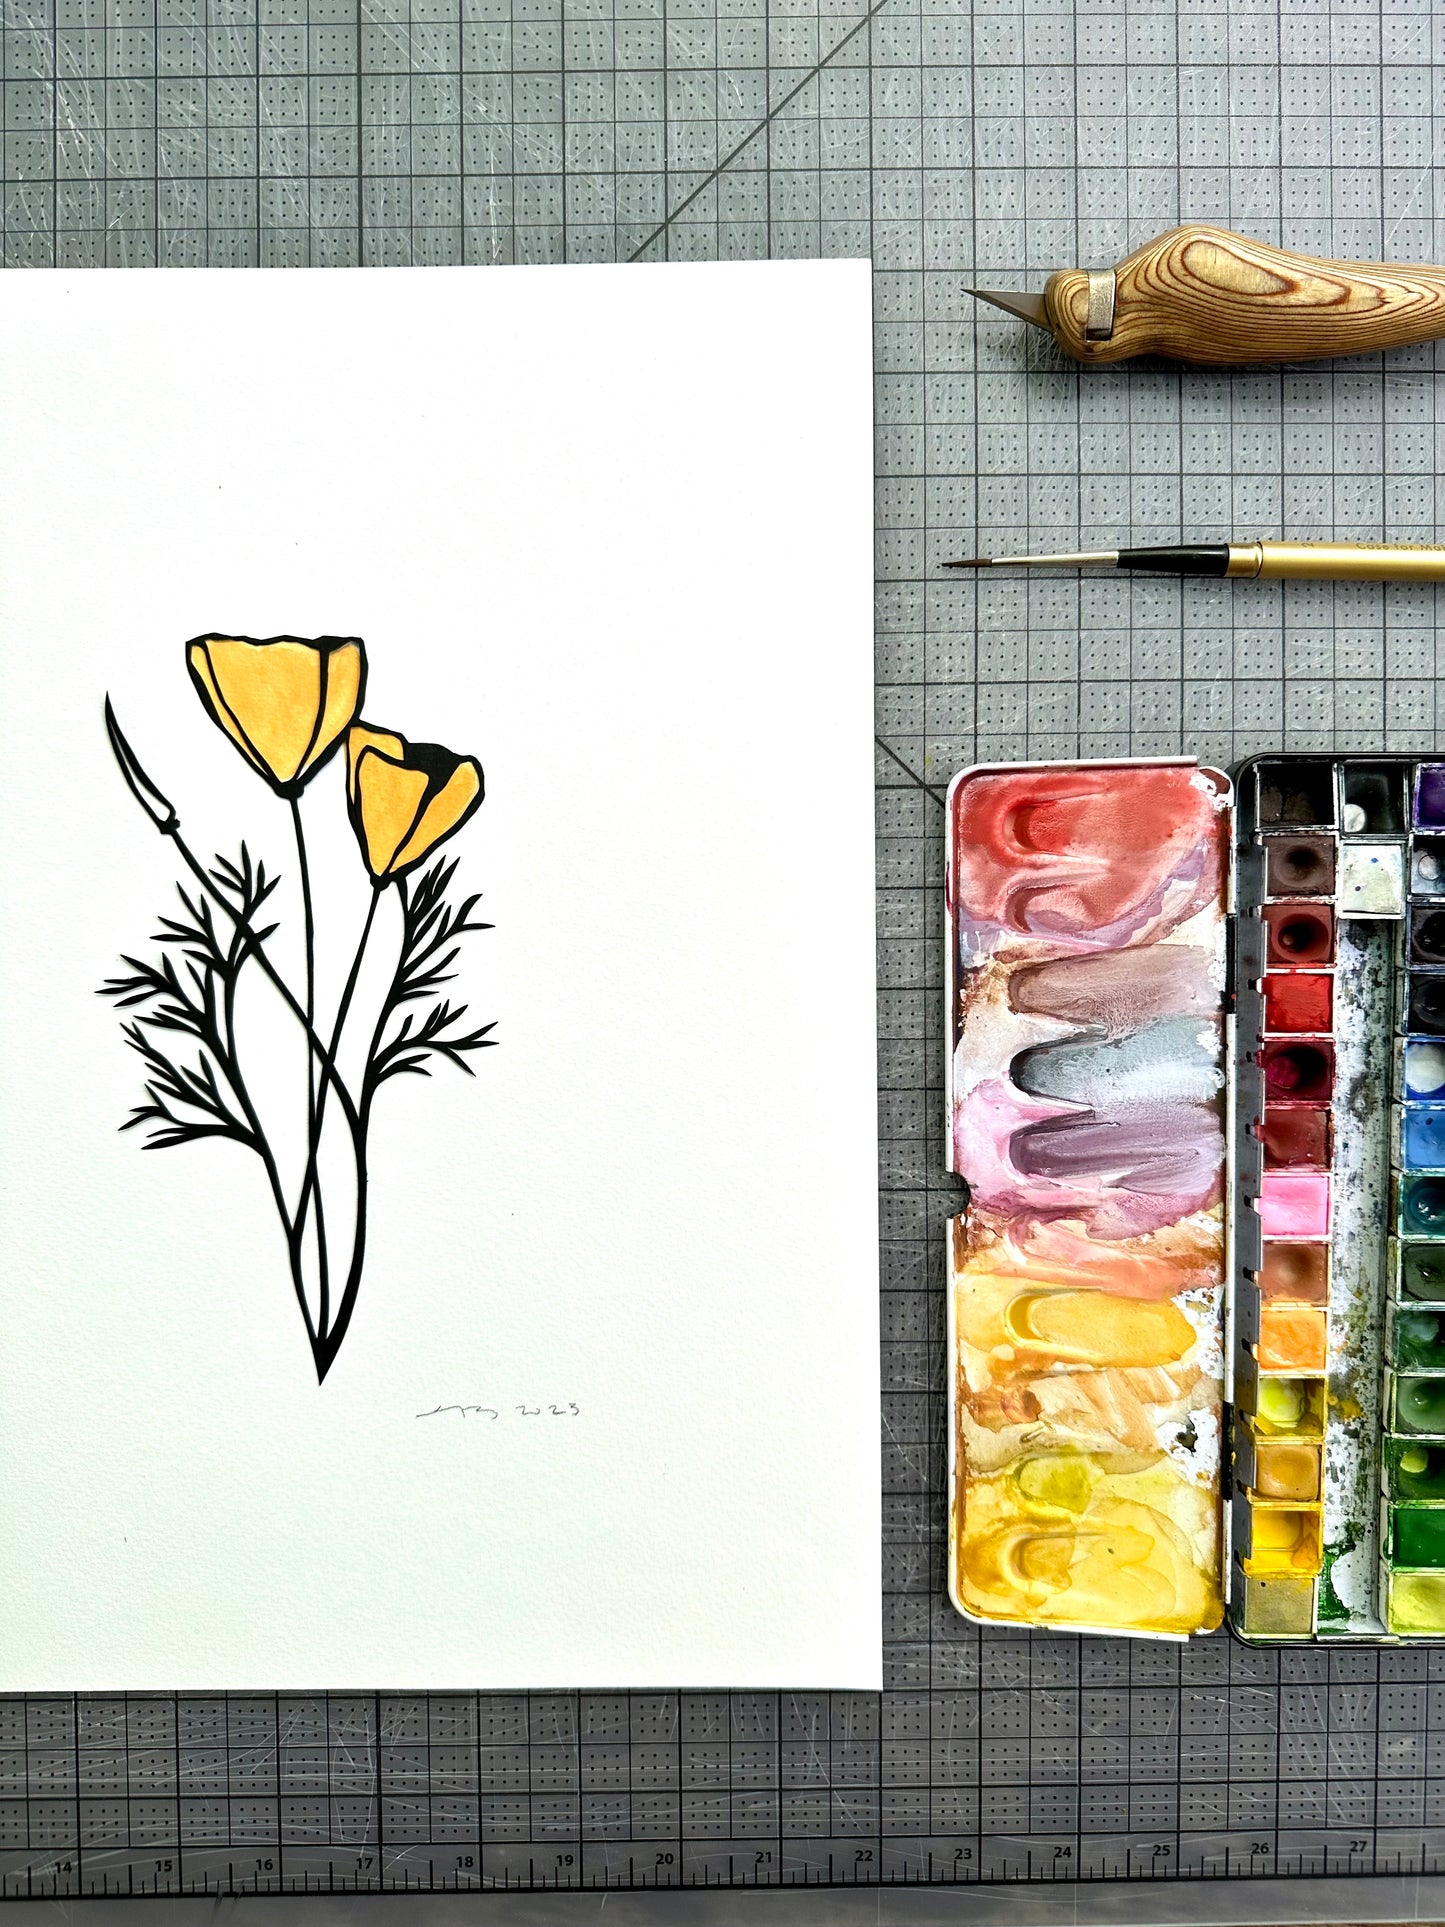 *Guest Instructor* Paper Cuts and Watercolor with Anna Brones